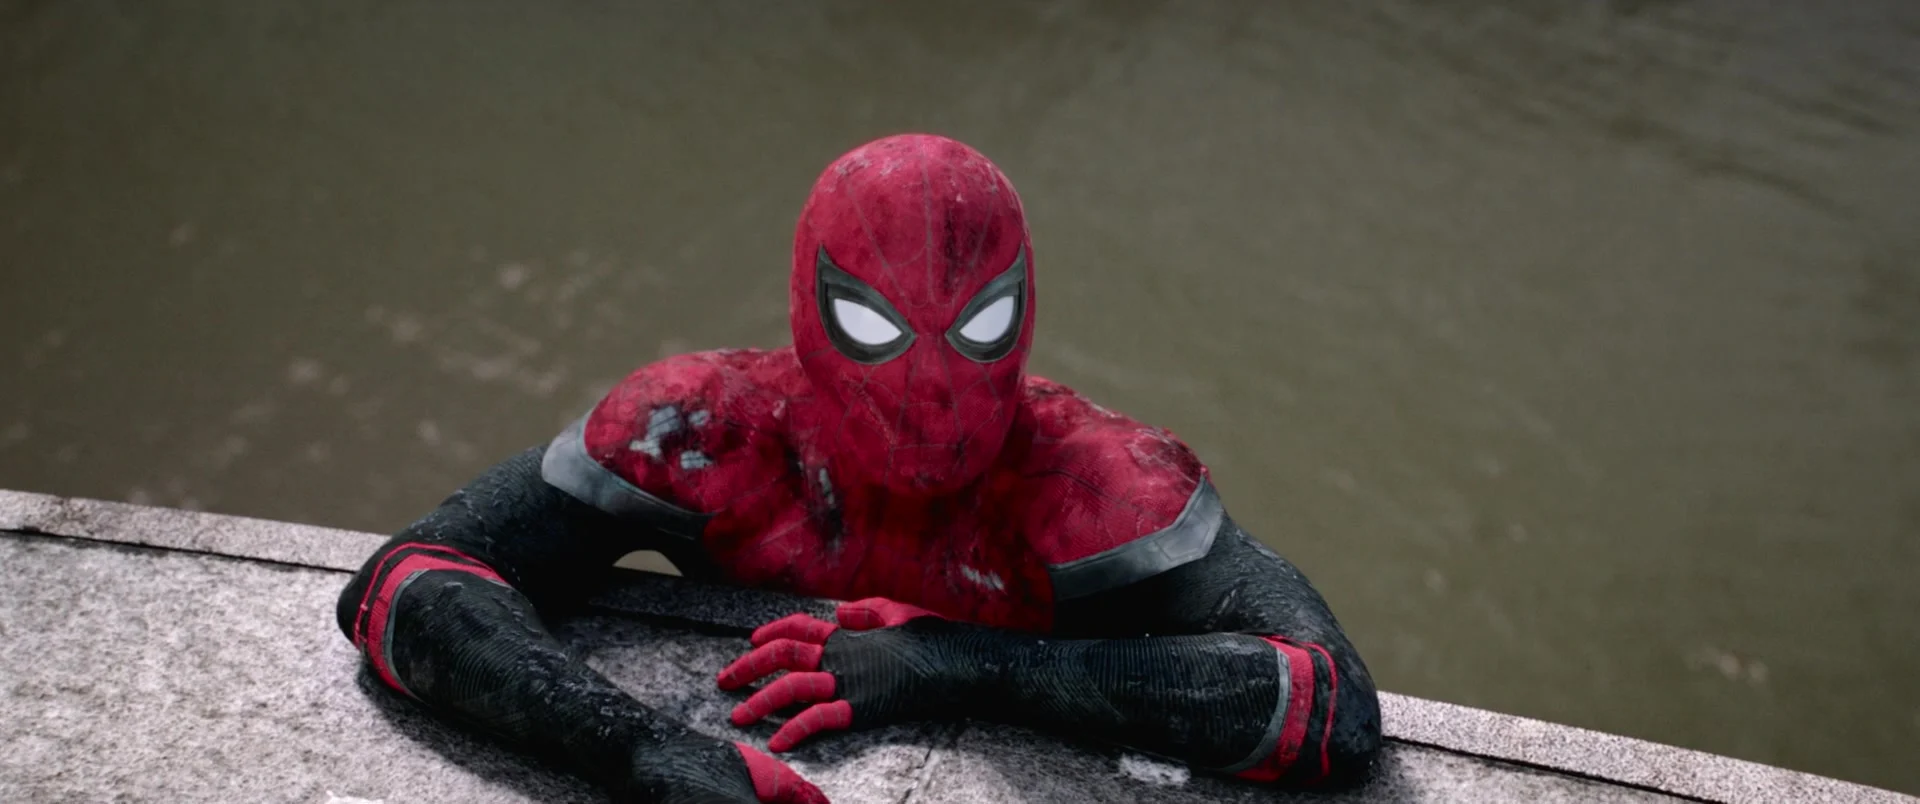 Spider-Man (Tom Holland) clings to the London Bridge in Spider-Man: Far Frome Home (2019), Marvel Entertainment